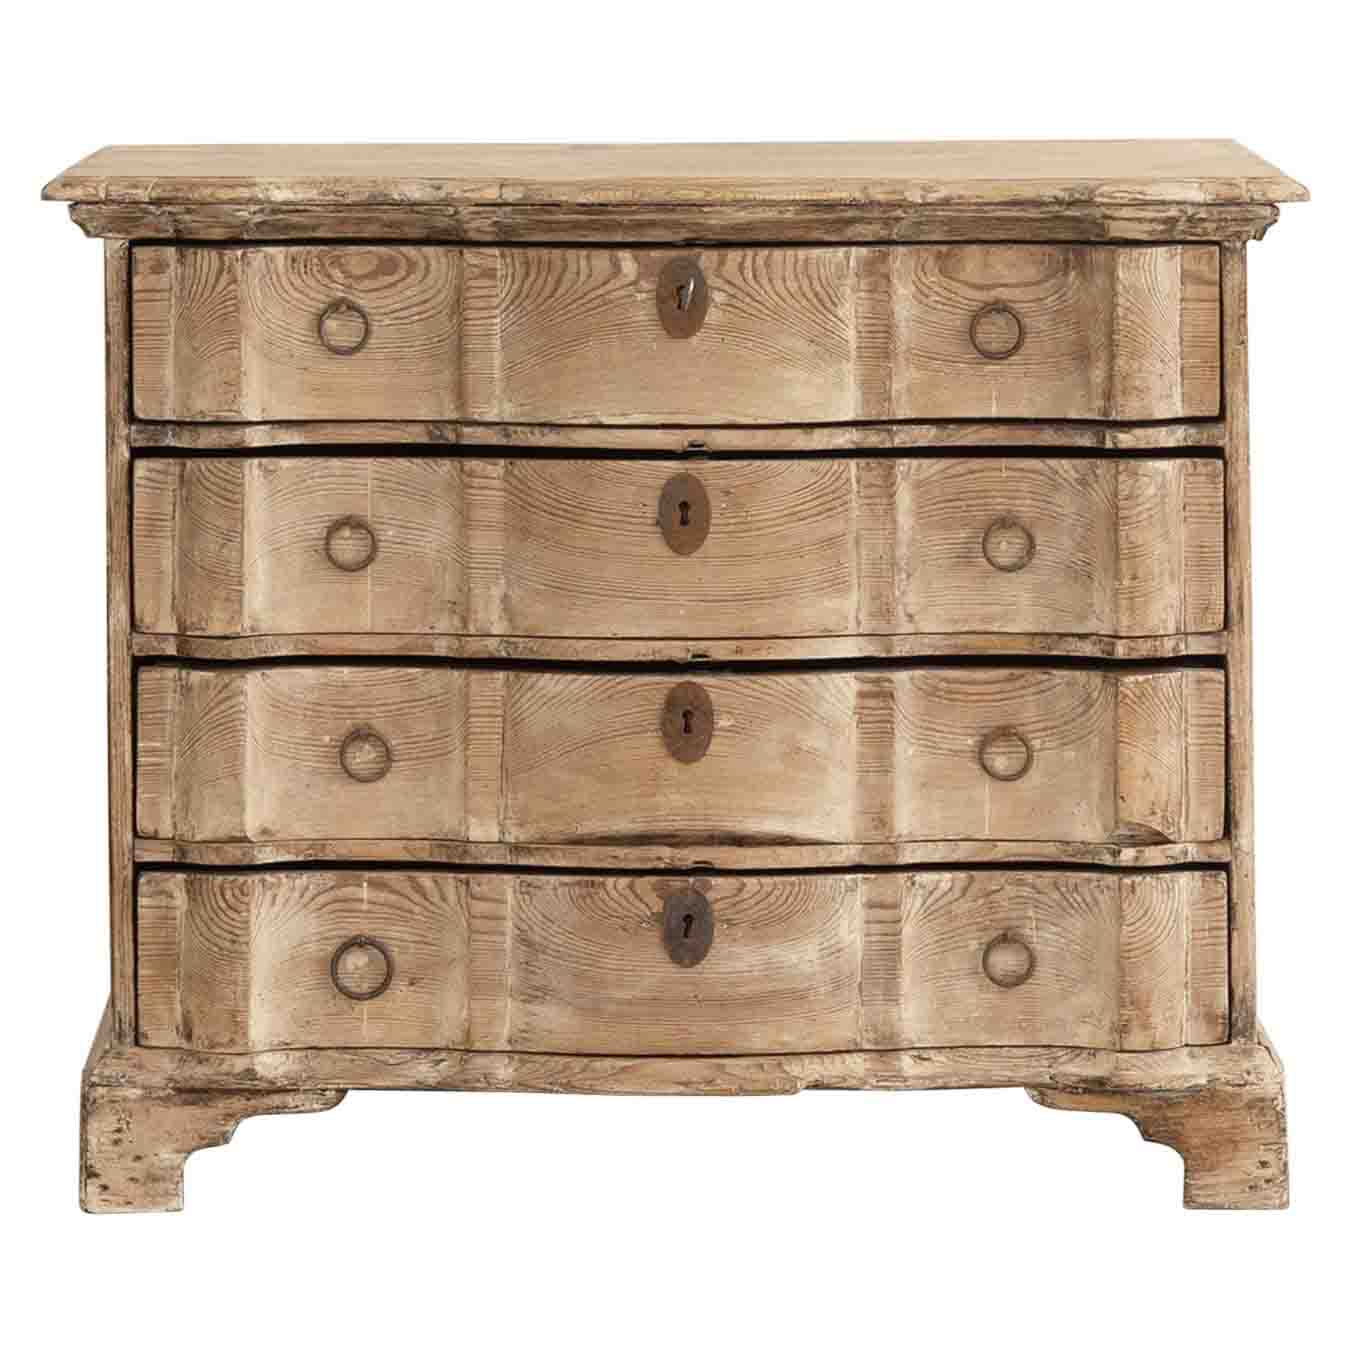 18th c. Danish Arbalette Shaped Commode in Original Patina For Sale